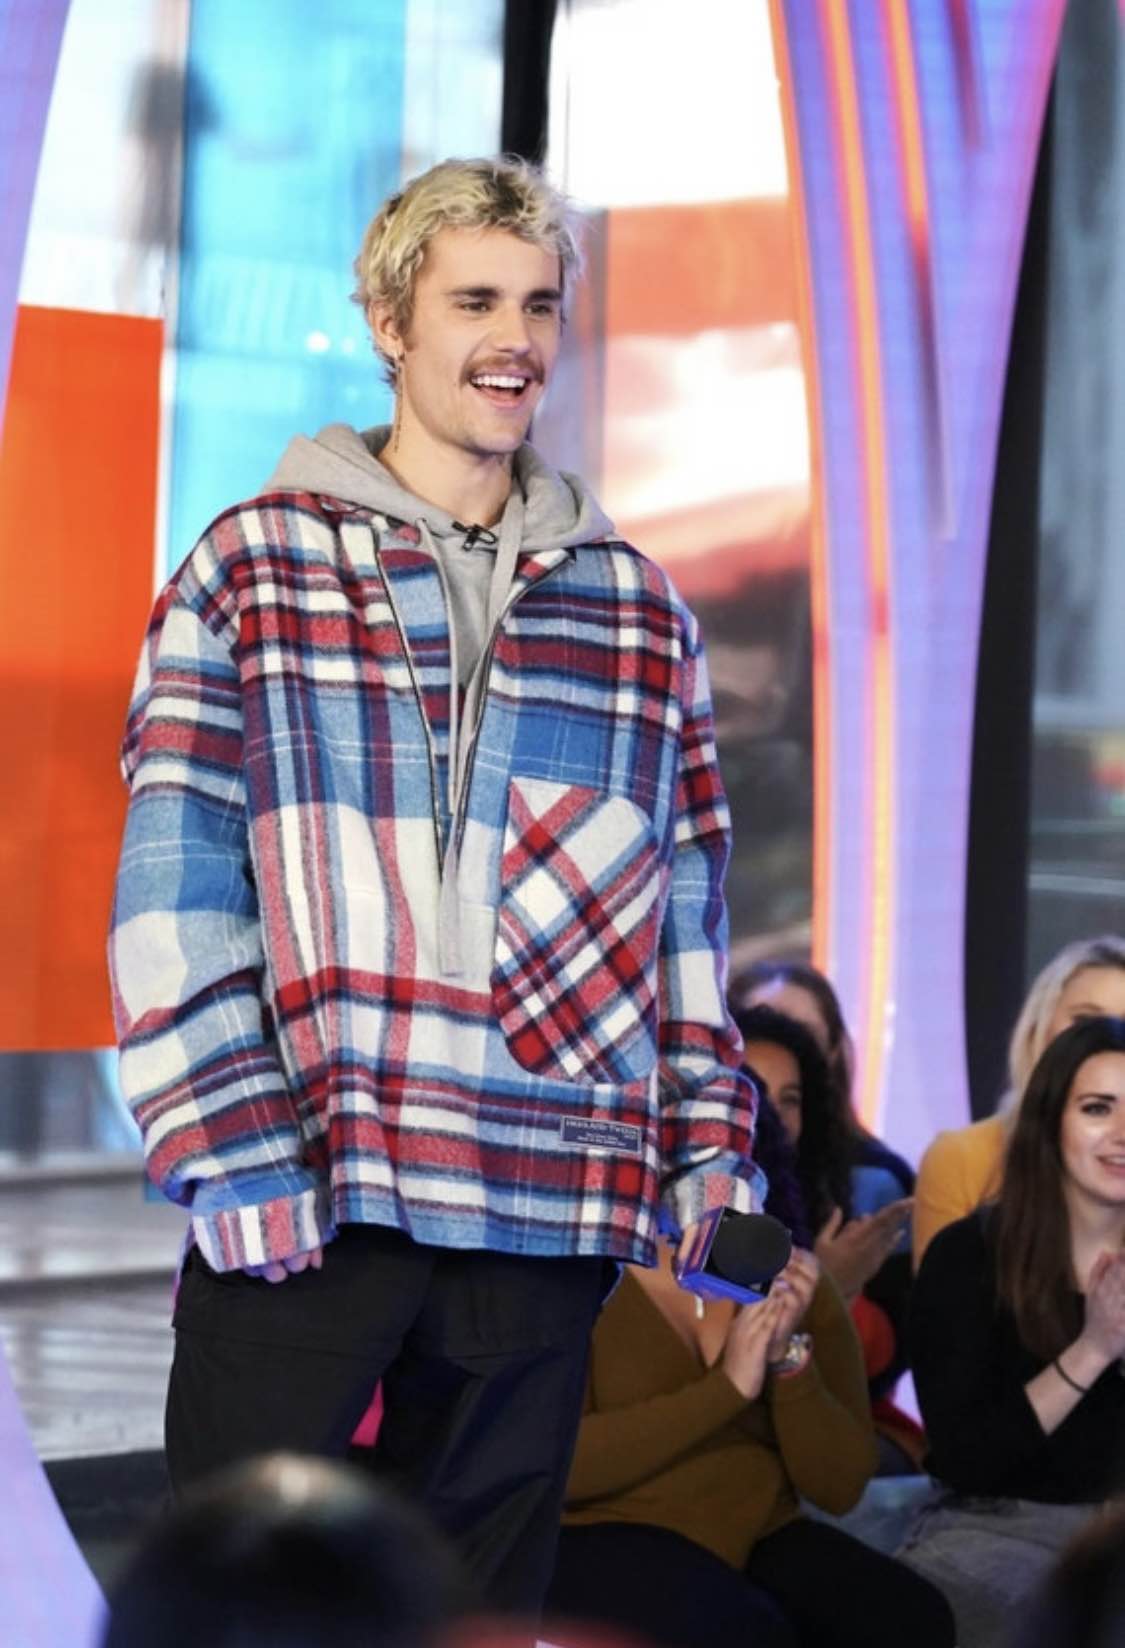 We11done - Checked Wool Shirt Multicolor Plaid Jacket Justin Bieber - 8